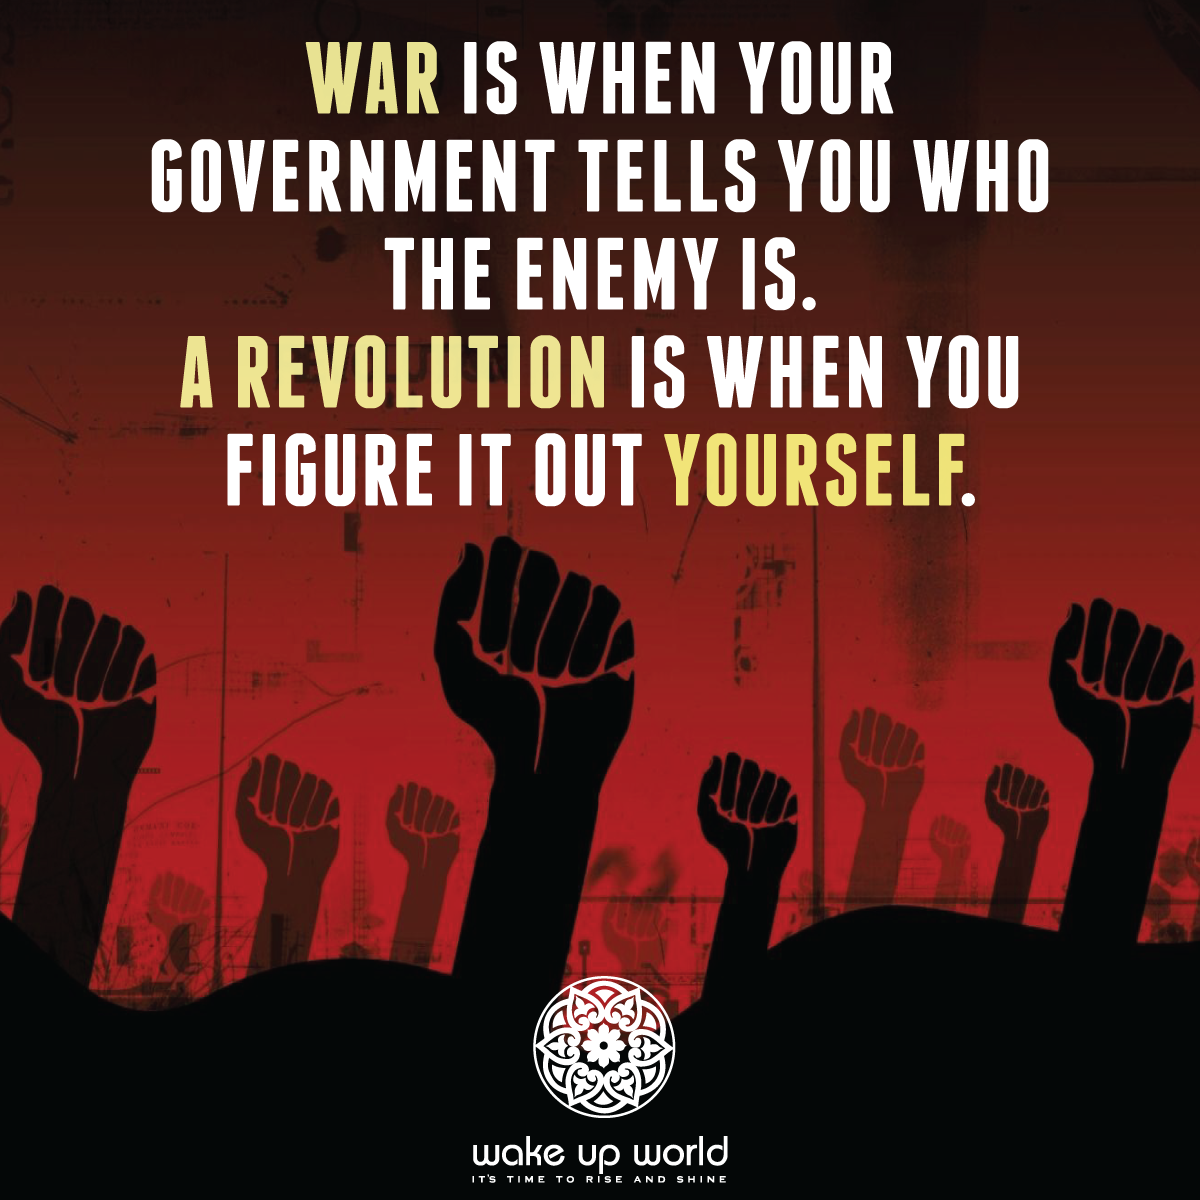 The Conspiracy Of War - Power, Profit, Propaganda and Imperialism 2